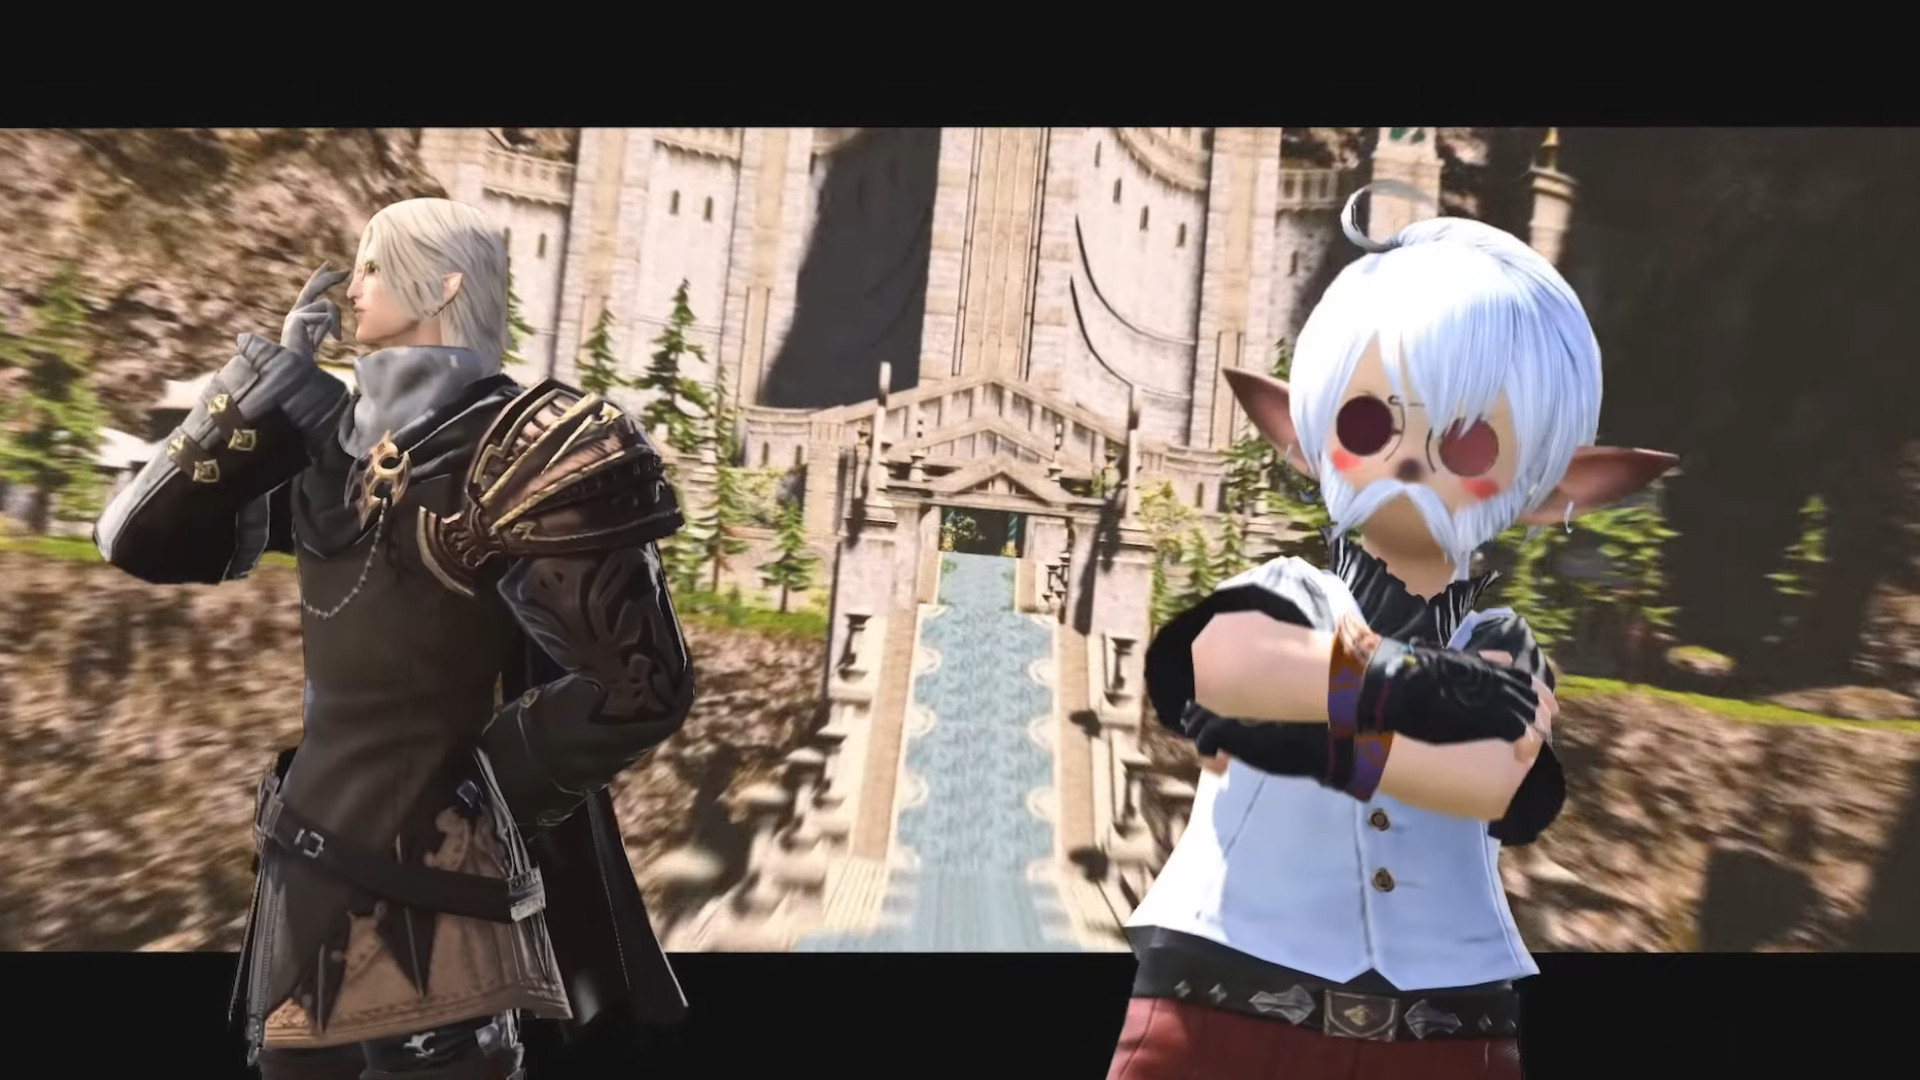 This Final Fantasy XIV anime intro is the best fake anime OP I've ever seen